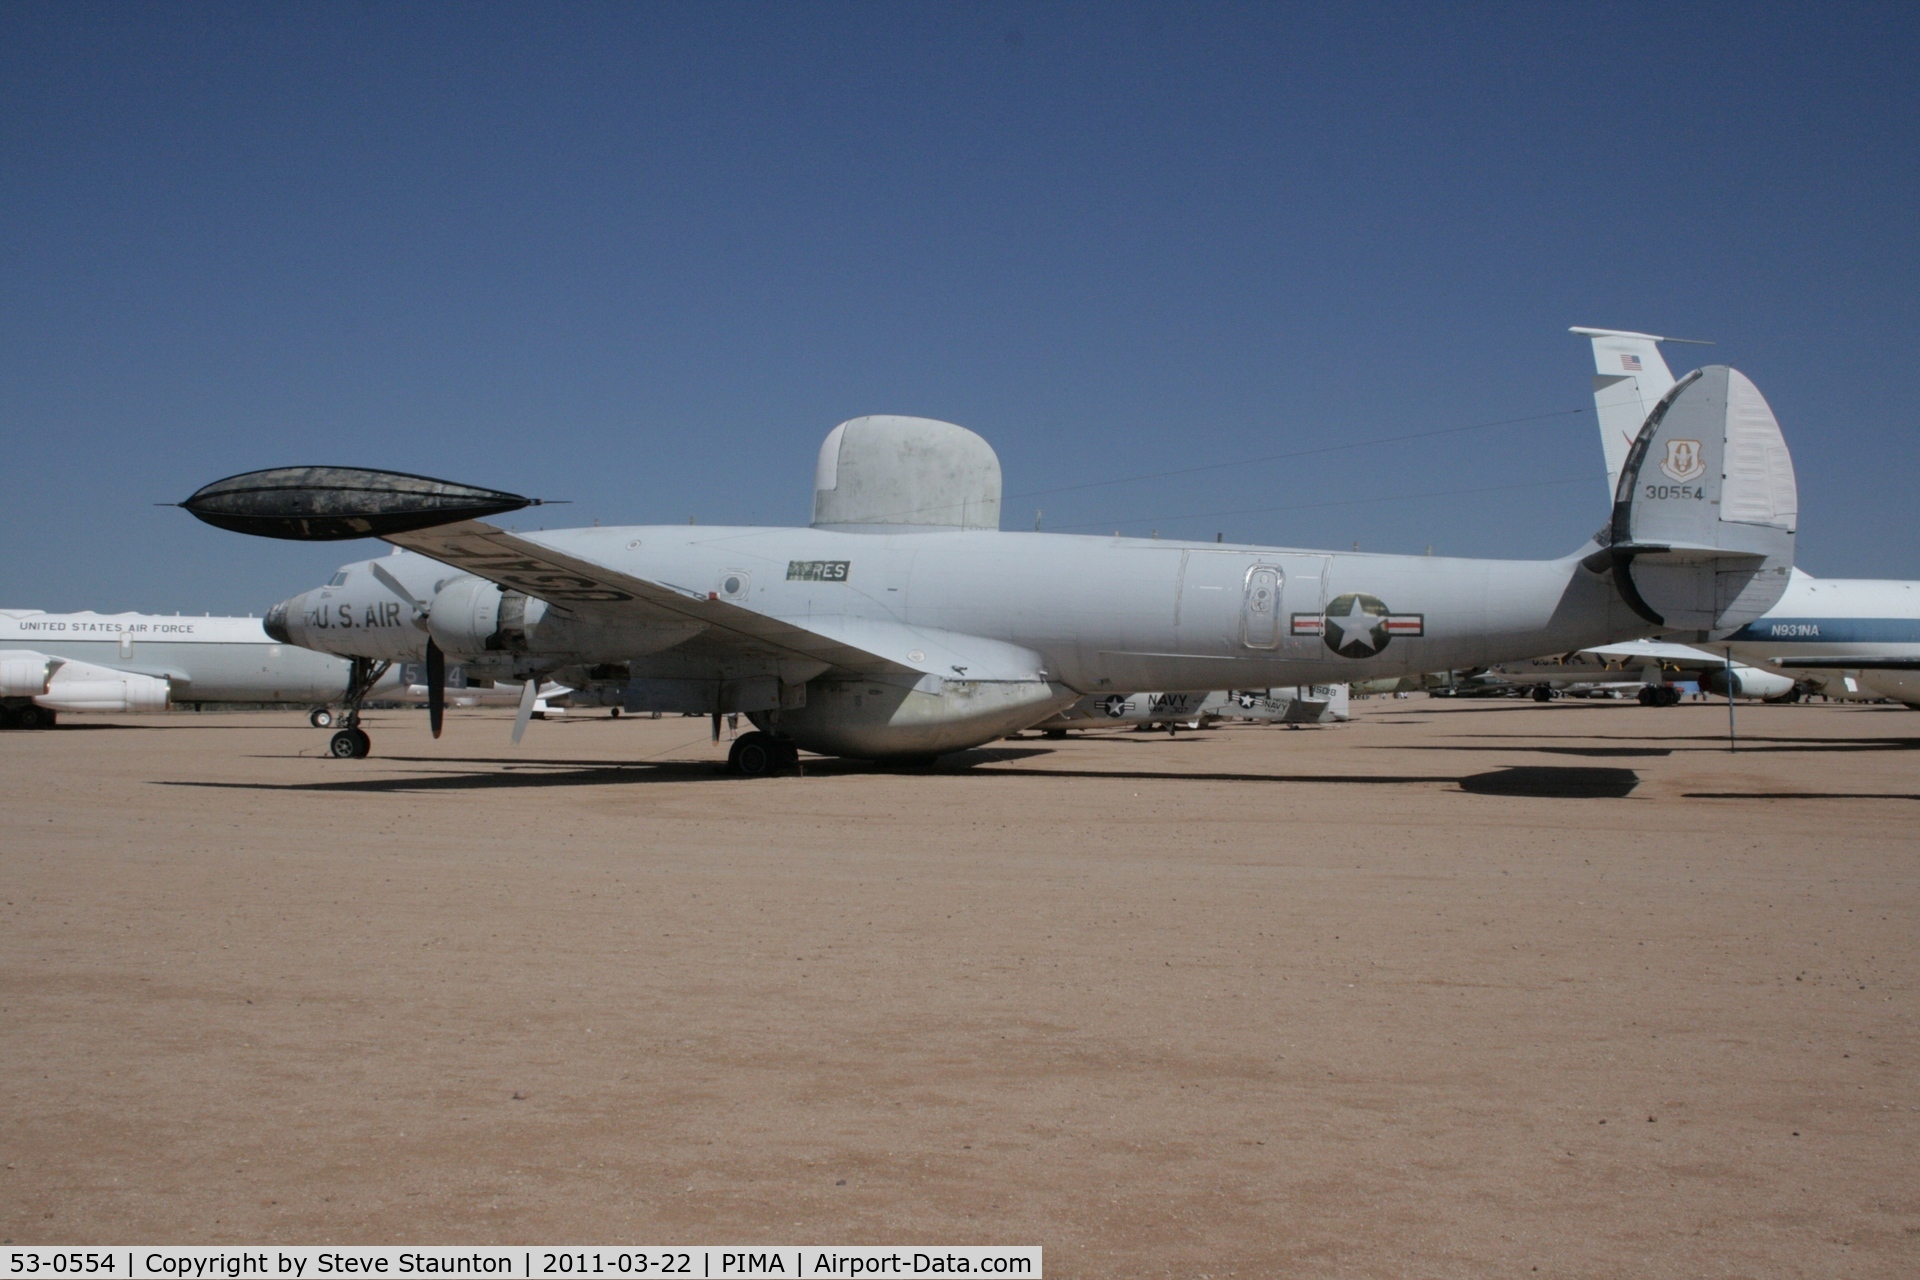 53-0554, 1953 Lockheed EC-121T Warning Star C/N 1049A-4369, Taken at Pima Air and Space Museum, in March 2011 whilst on an Aeroprint Aviation tour